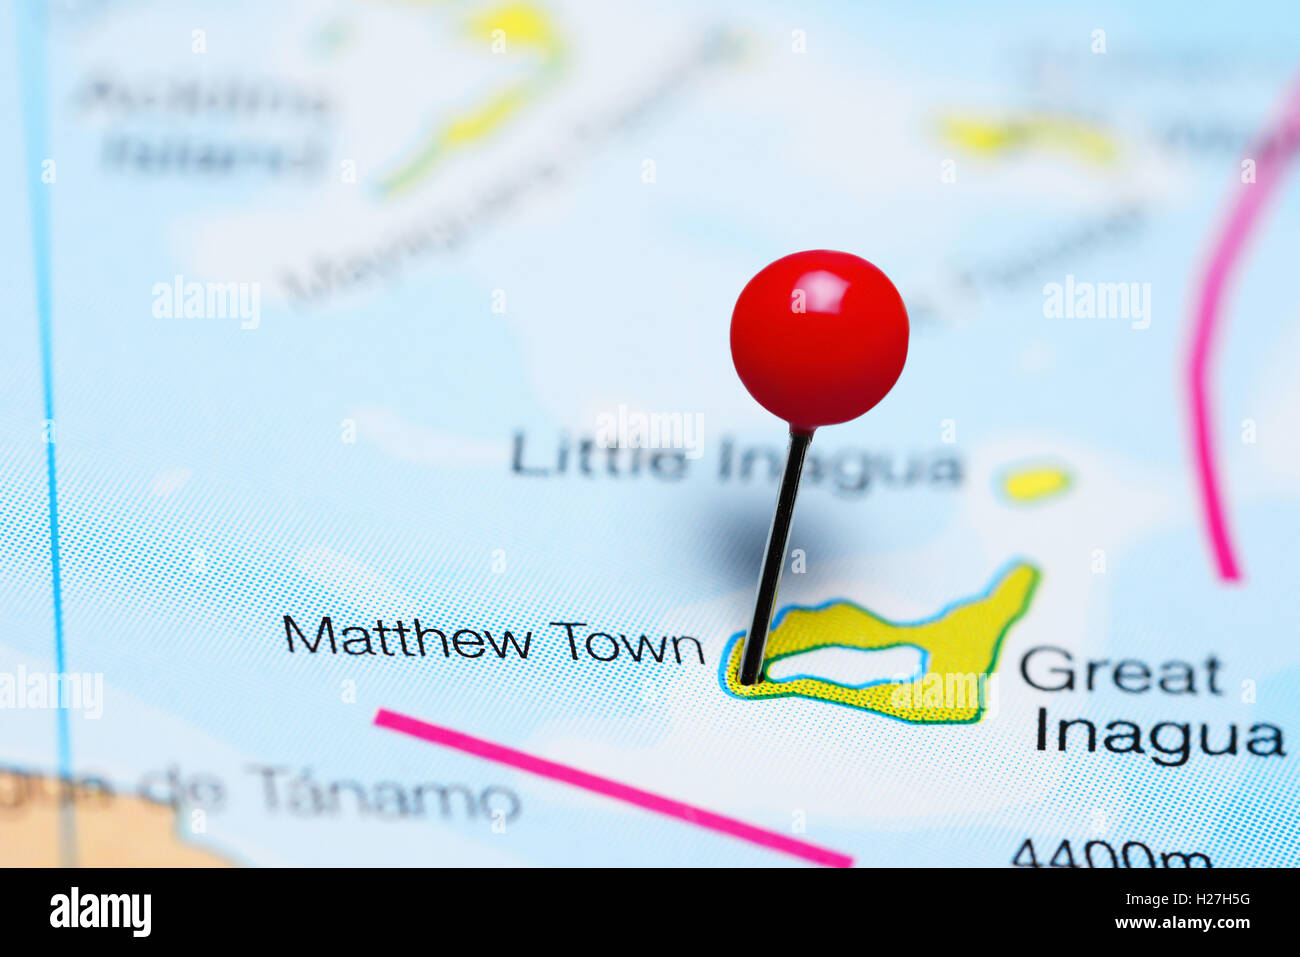 Matthew Town pinned on a map of Bahamas Stock Photo